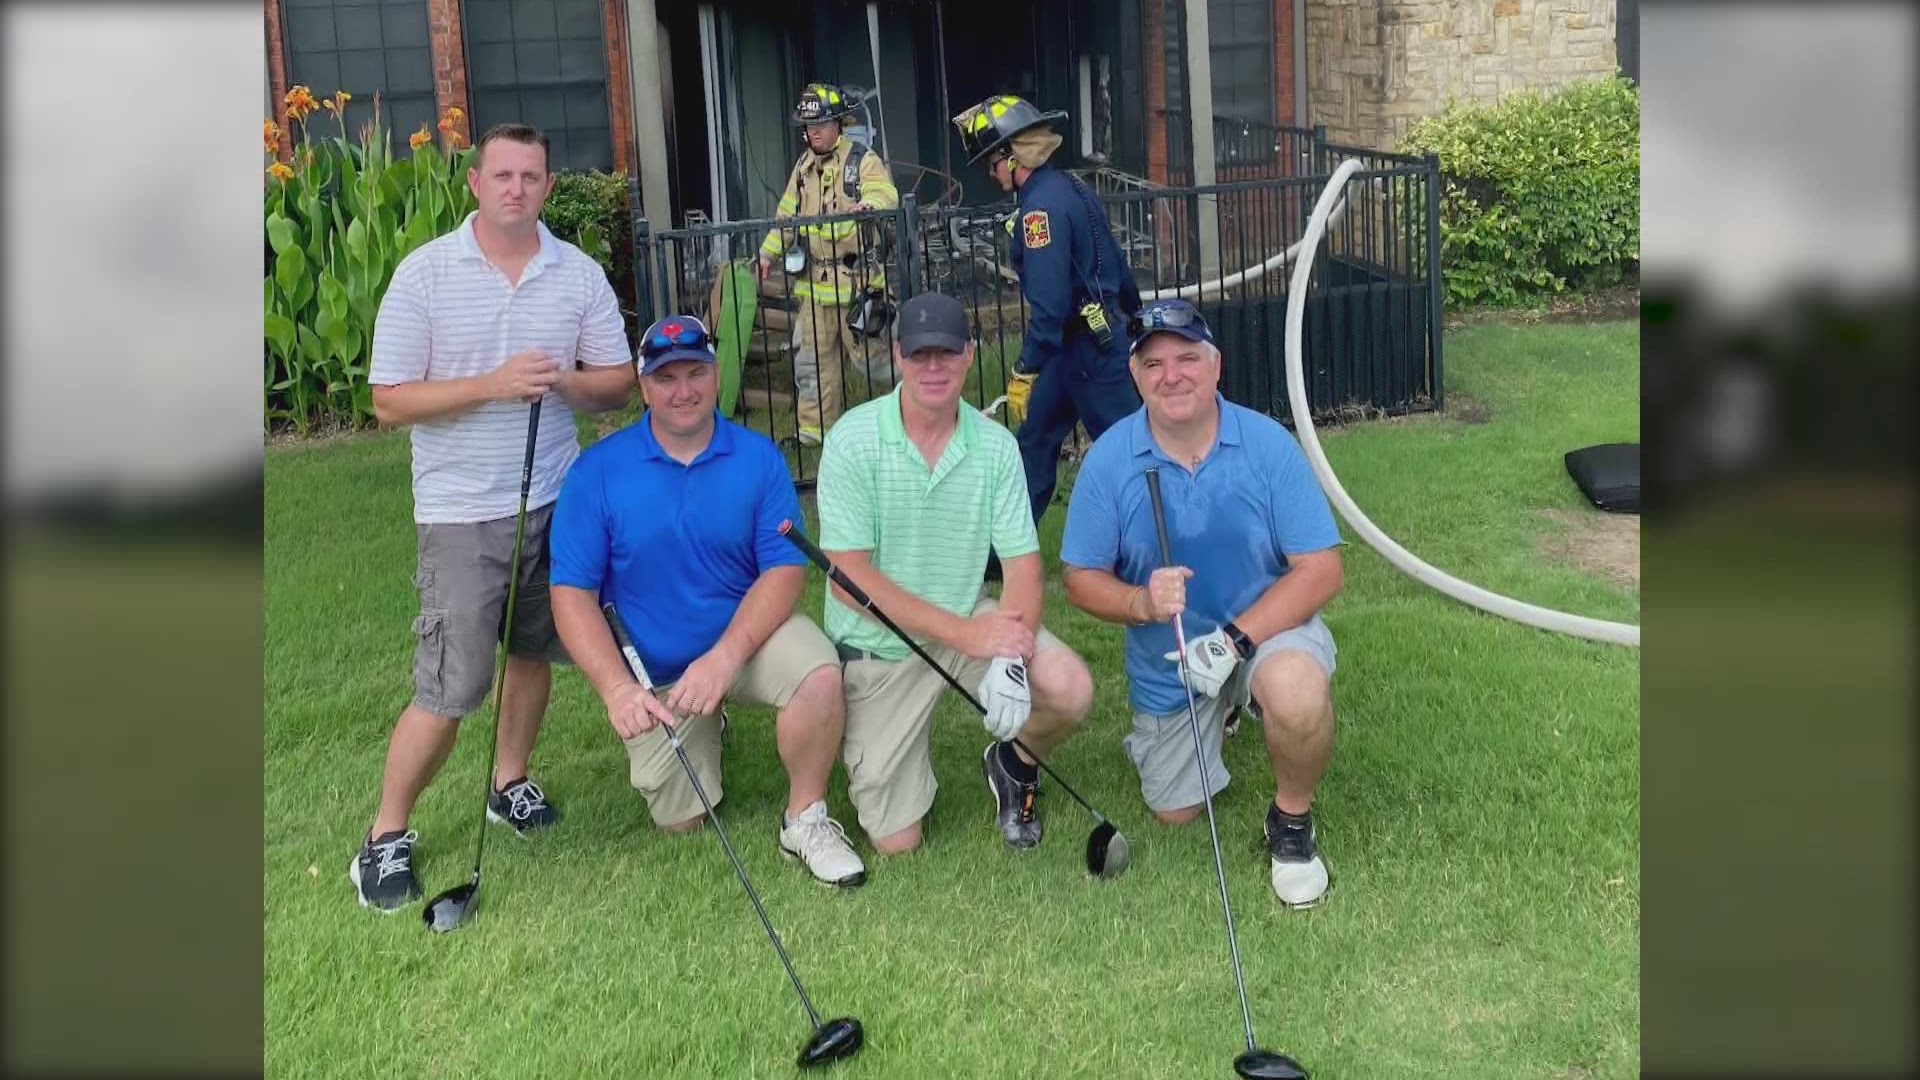 When a group of off-duty McKinney firefighters saw smoke, they didn't hesitate to drop the clubs and take actions.